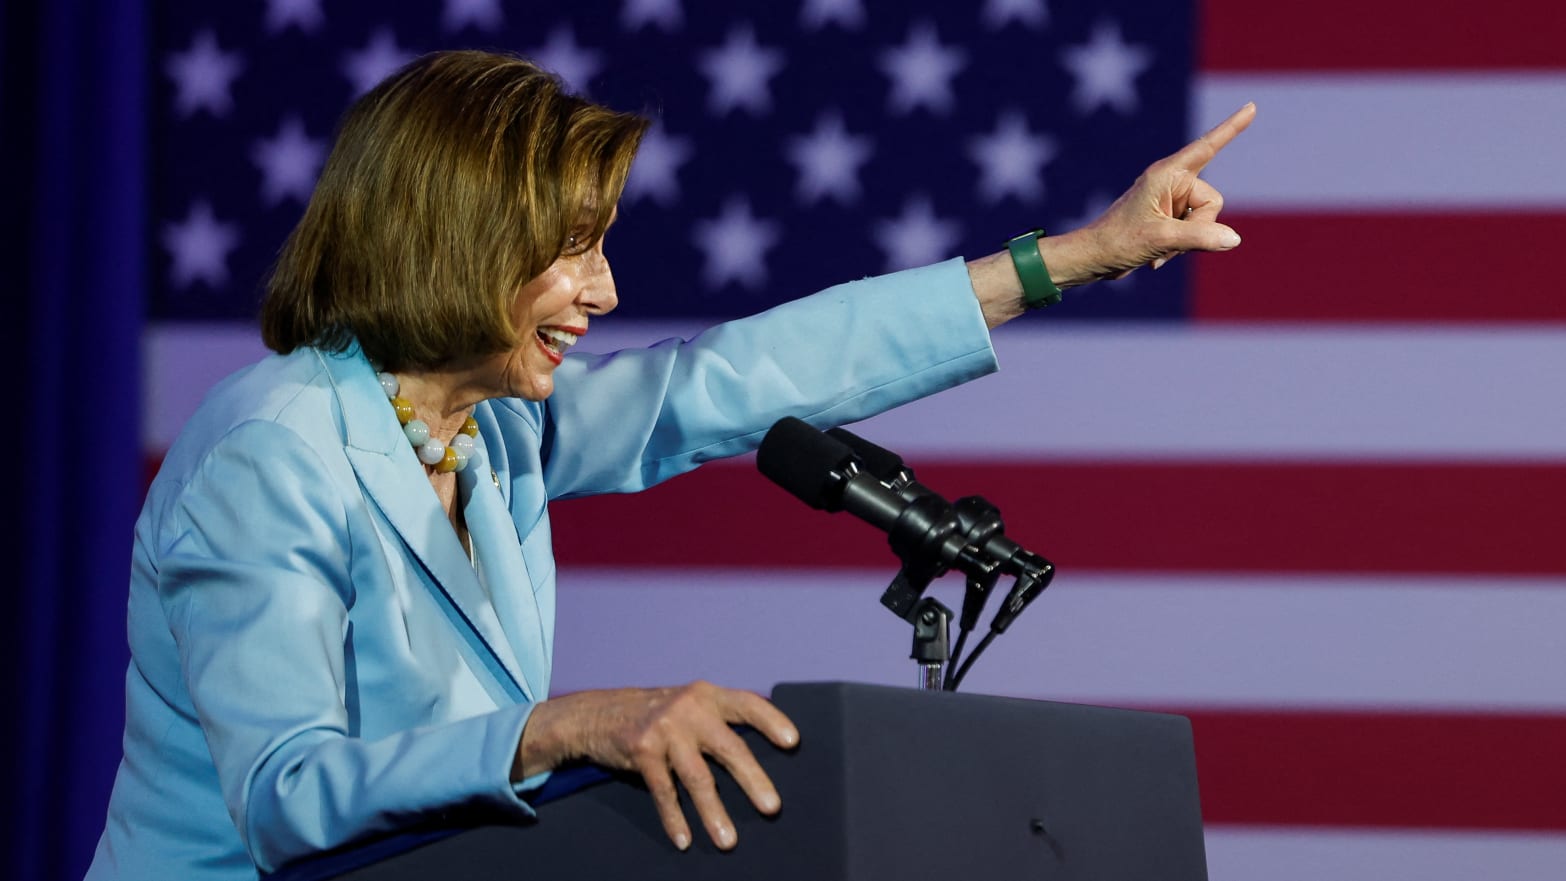 A picture of former Speaker of the House of Representatives Nancy Pelosi (D-CA), who revealed to volunteers on Friday that she will run for reelection in 2024, Politico reported.